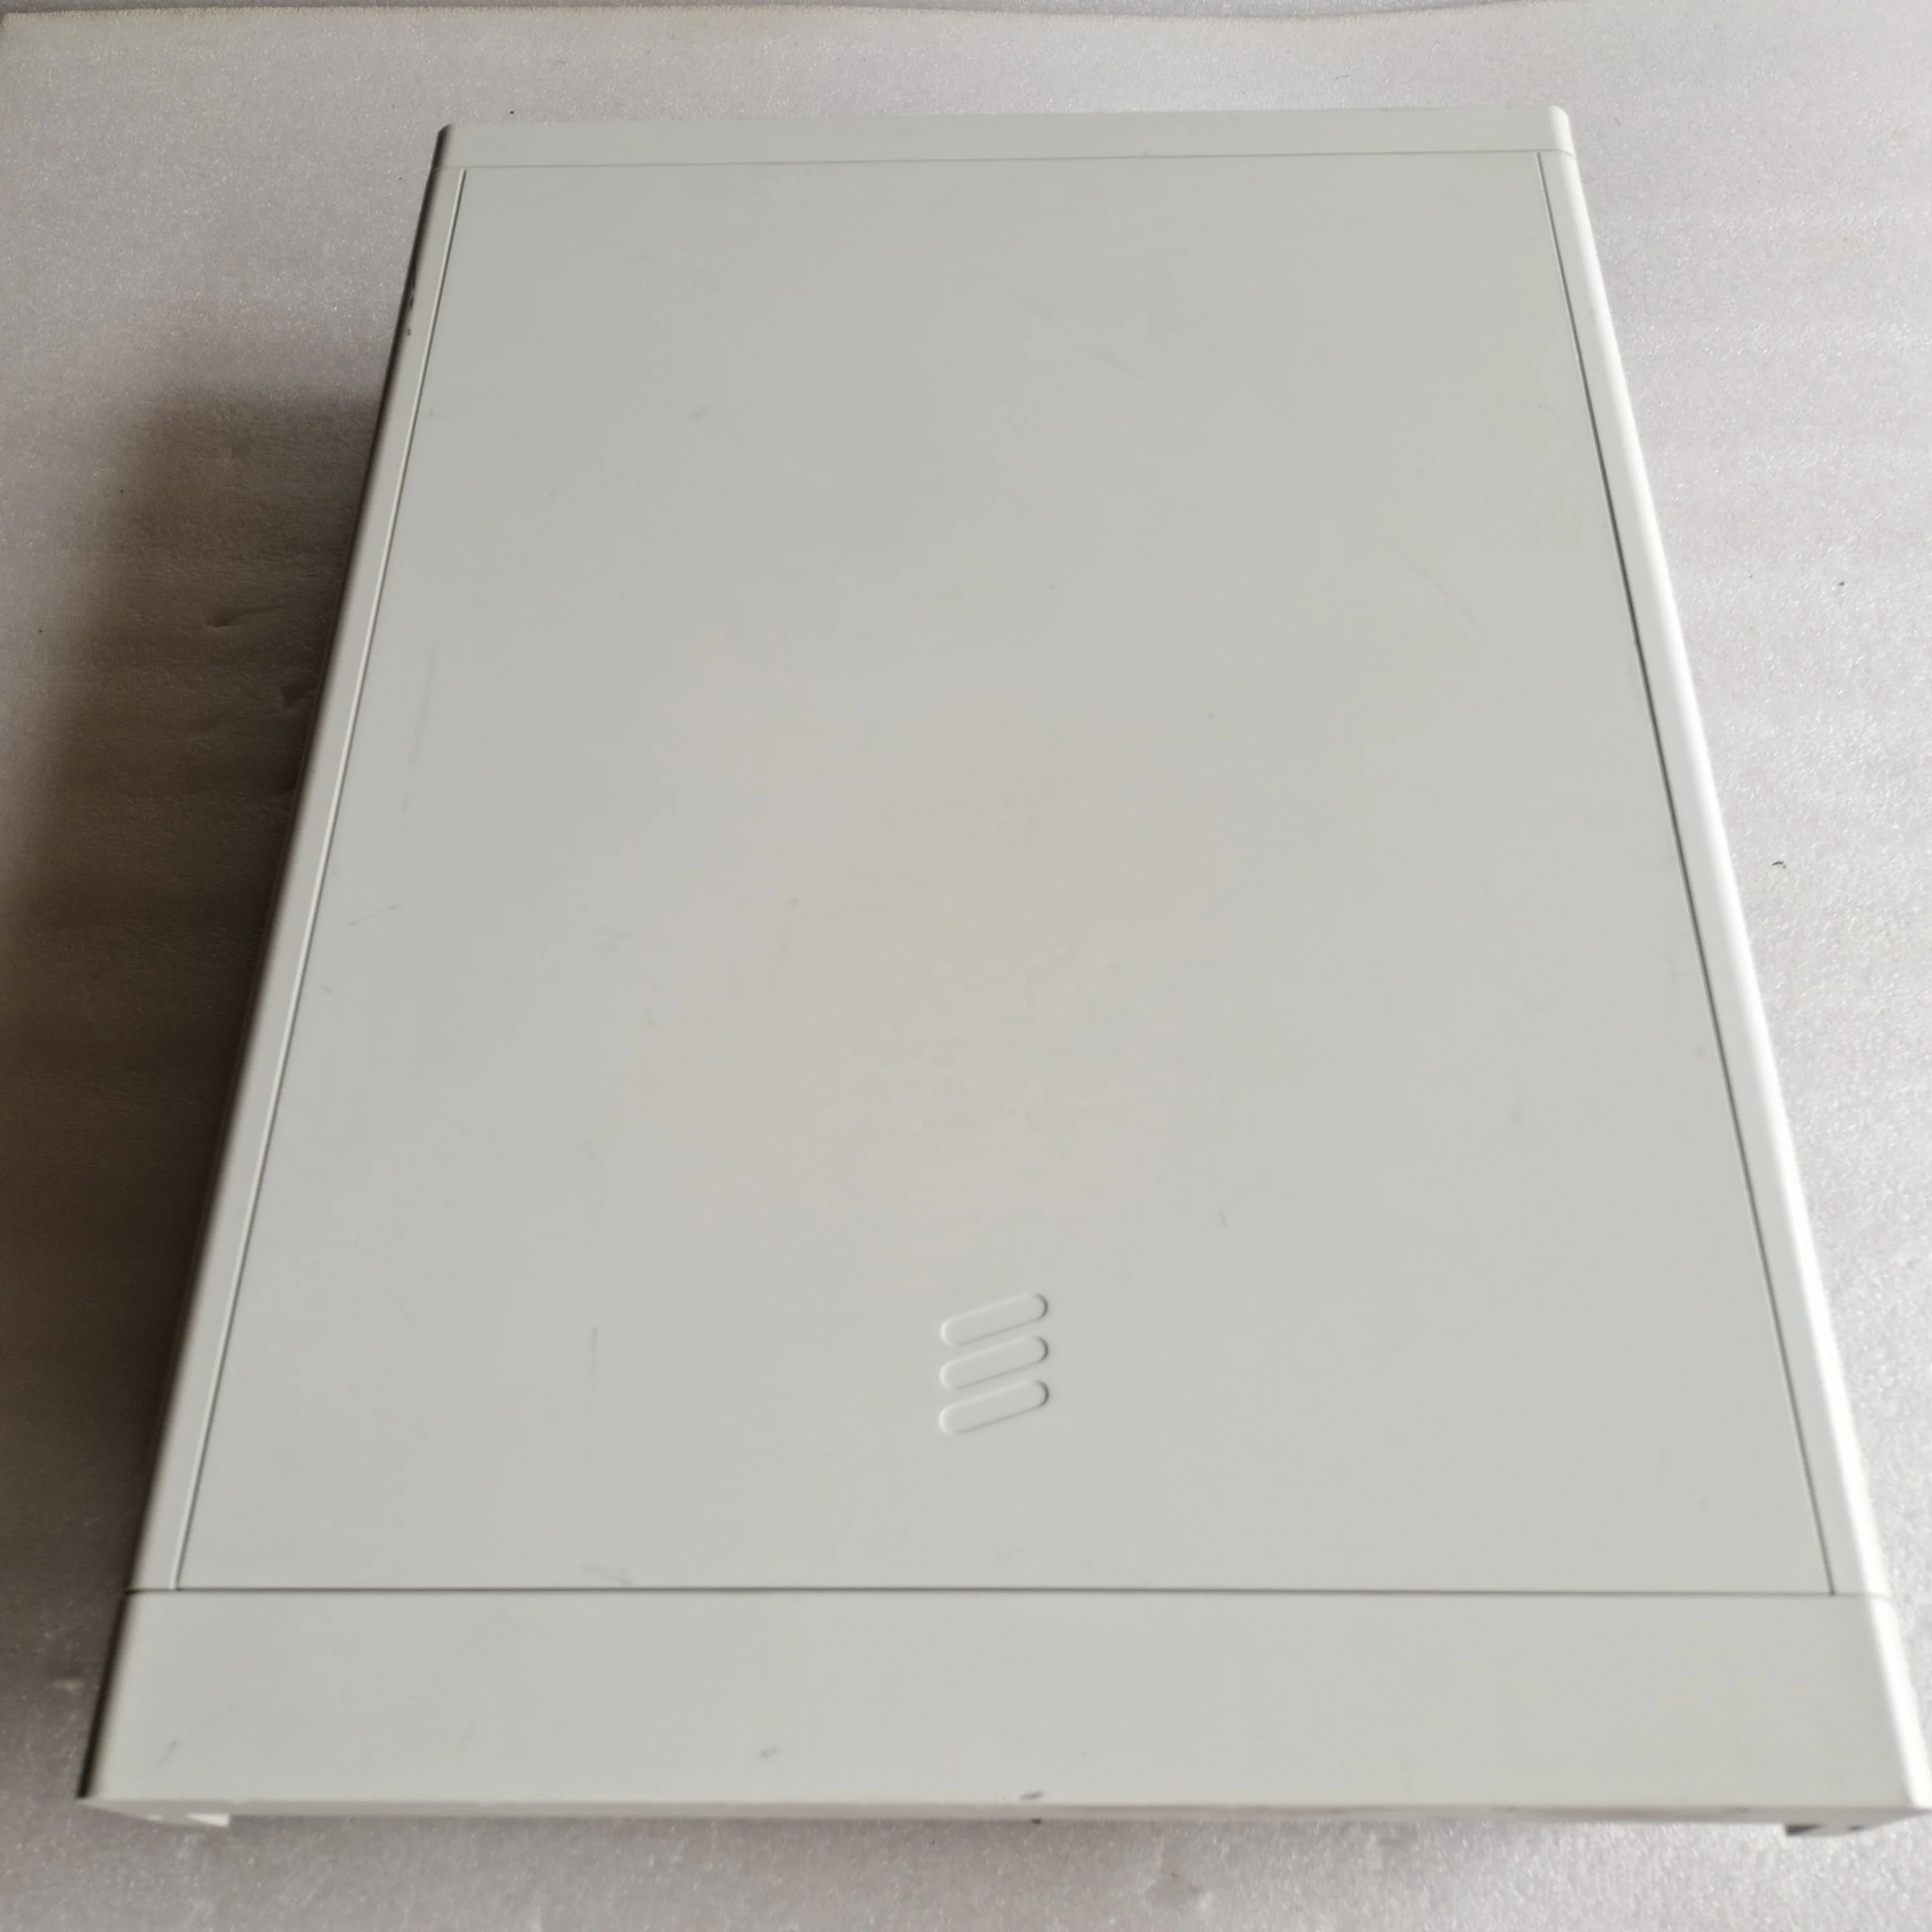 YUNPAN lte base station on sale for hotel-4